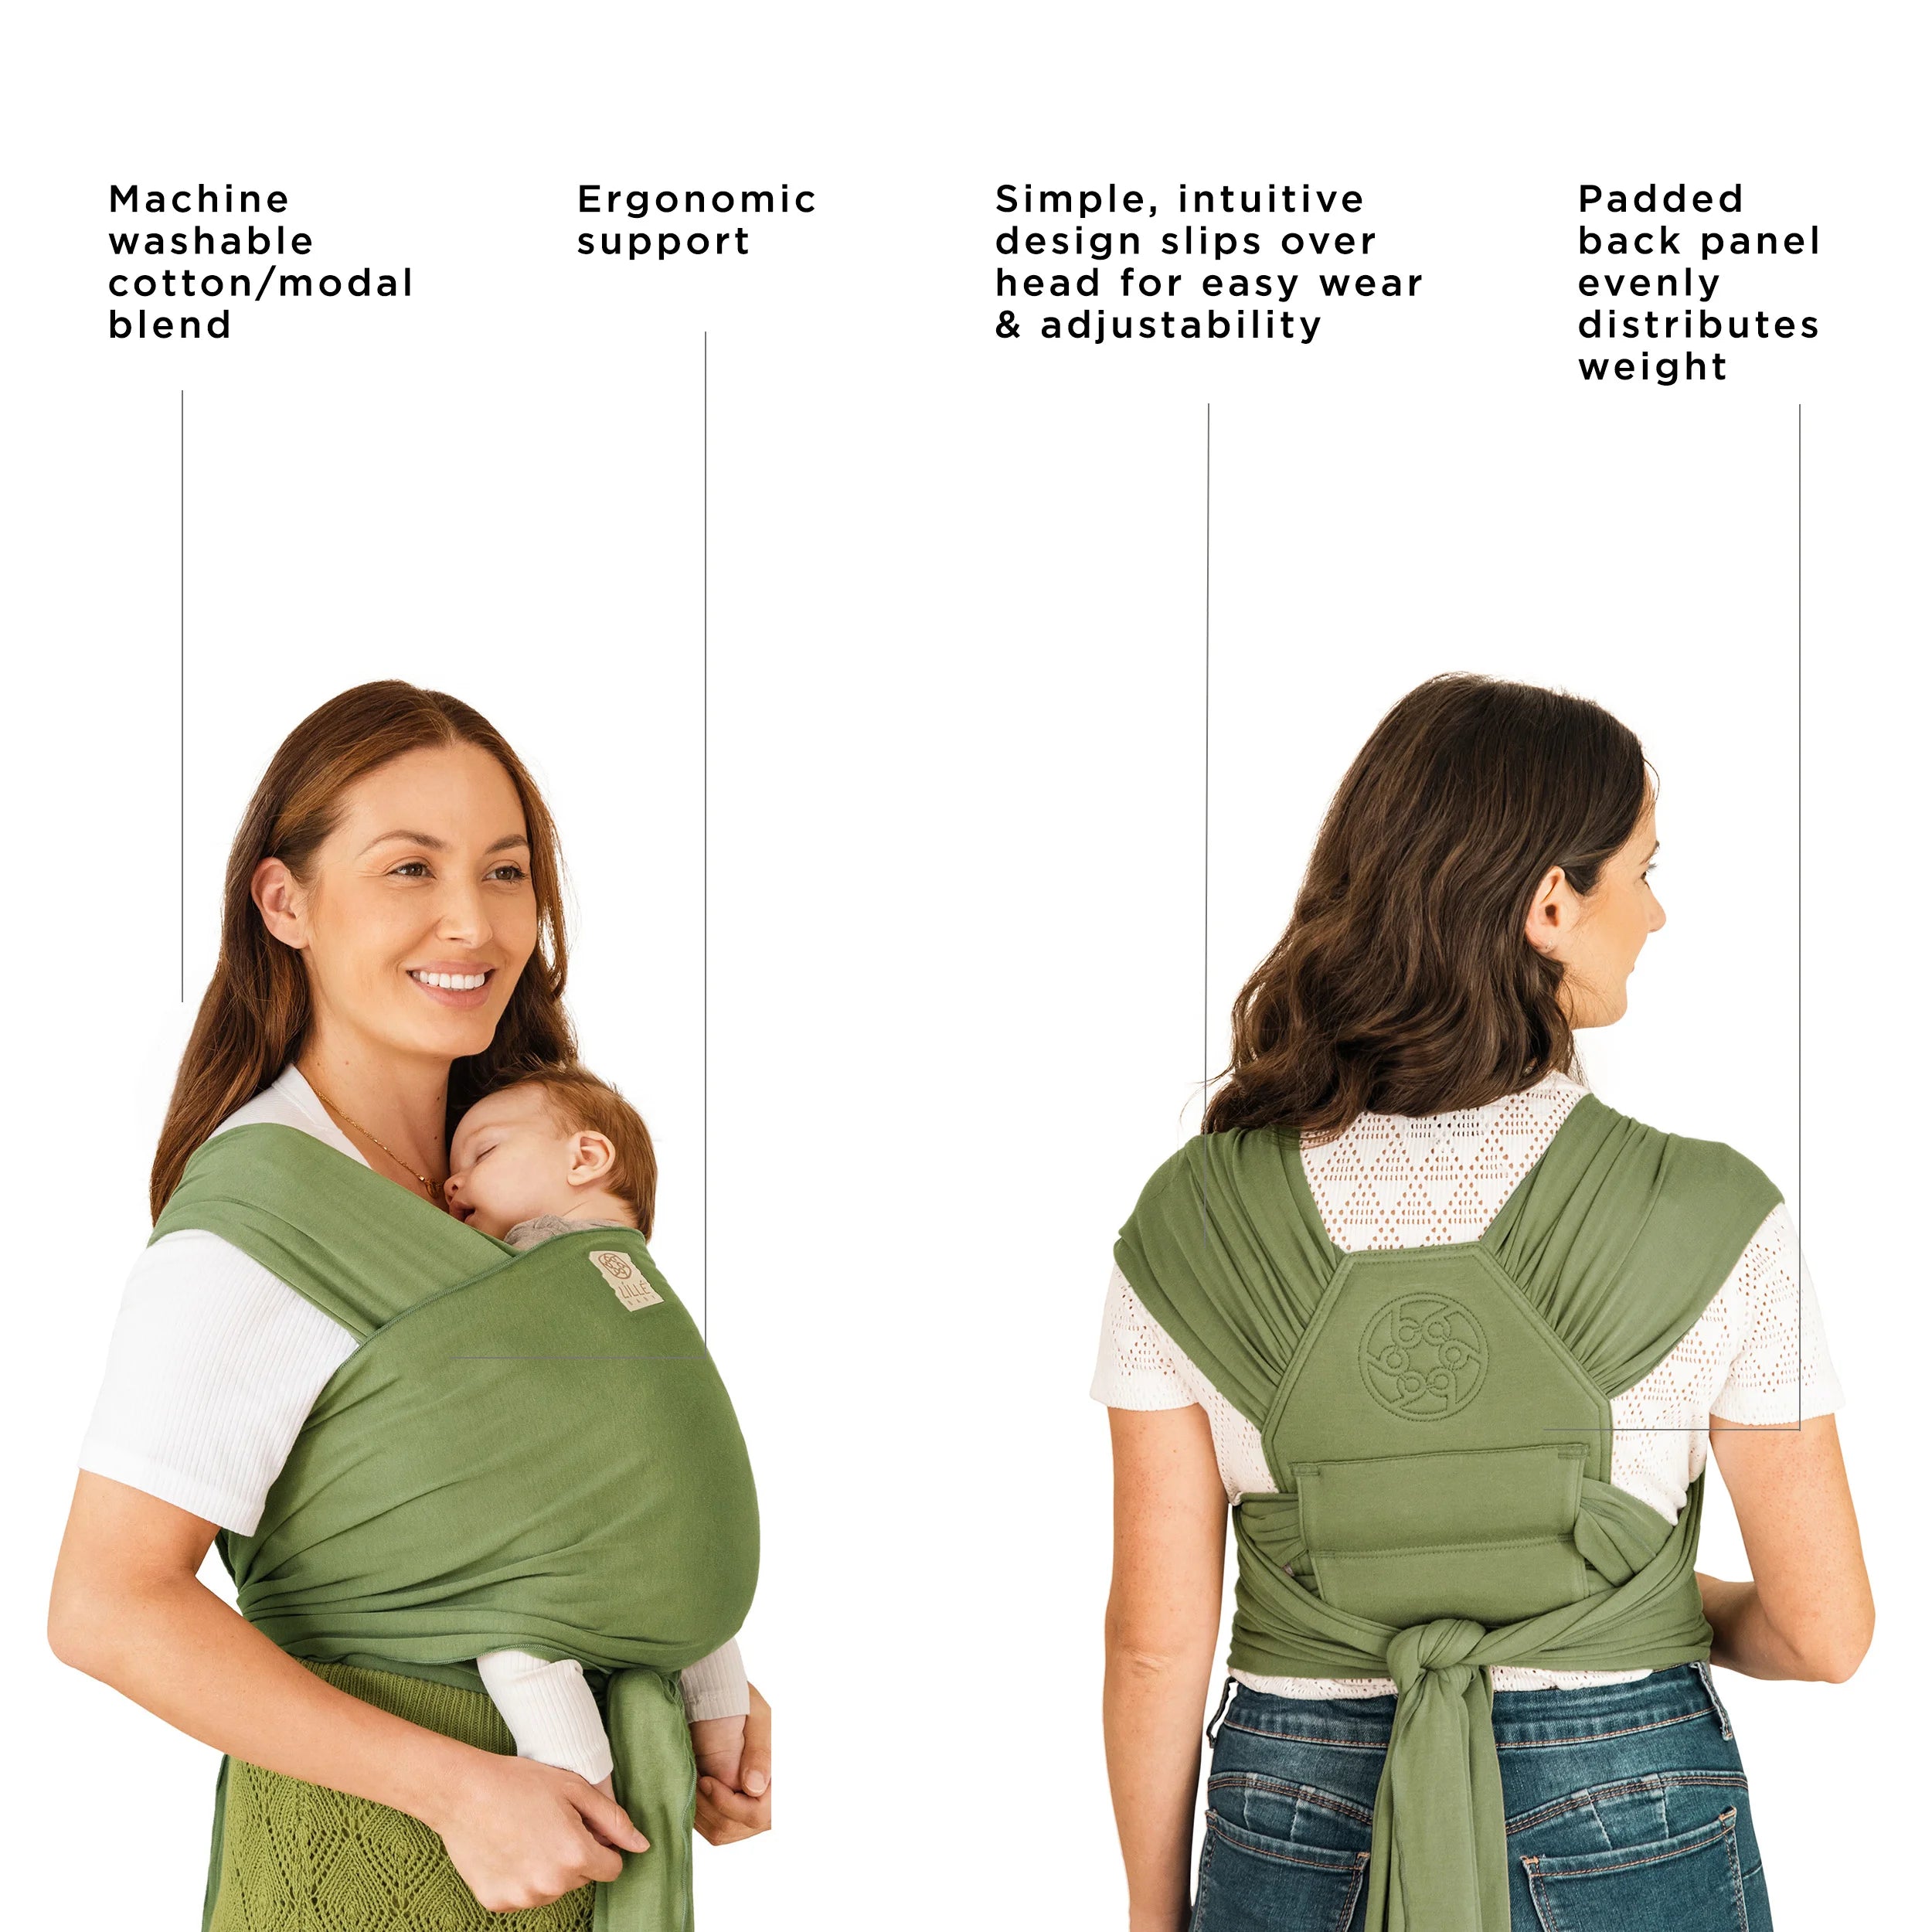 dragonfly wrap is machine washable cotton/modal blend, ergonomic support, simple intuitive design slips over head for easy wear and adjustability, padded back panel evenly distributes weight